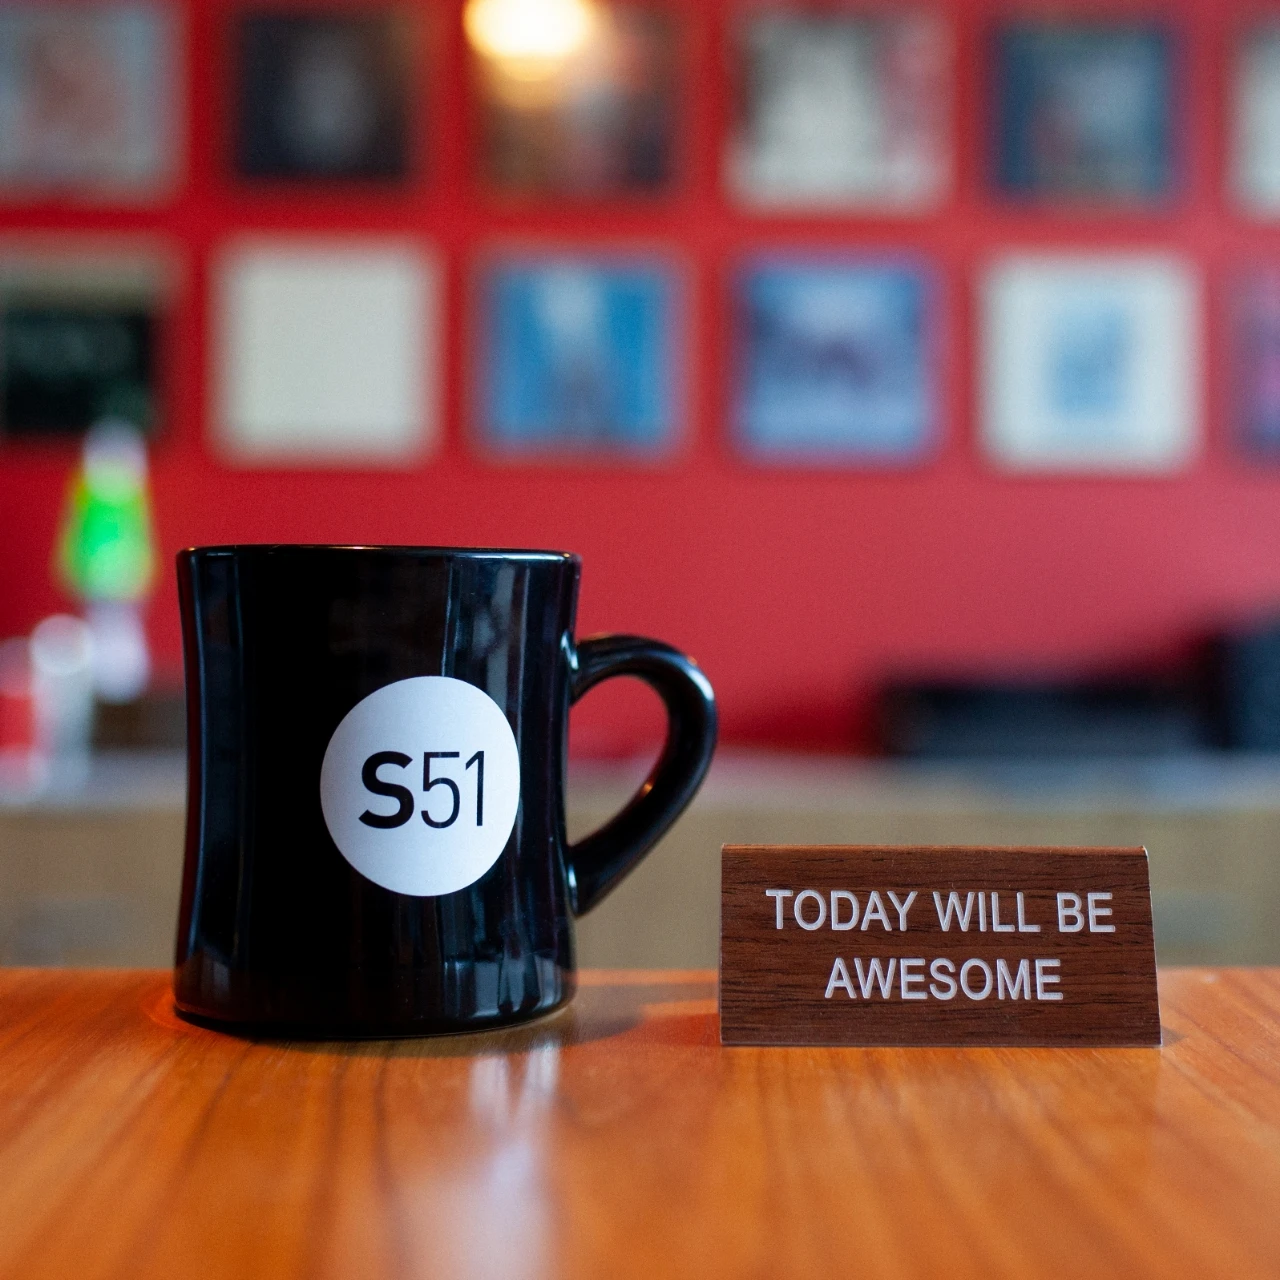 A coffee cup with a sign that says today will be awesome.